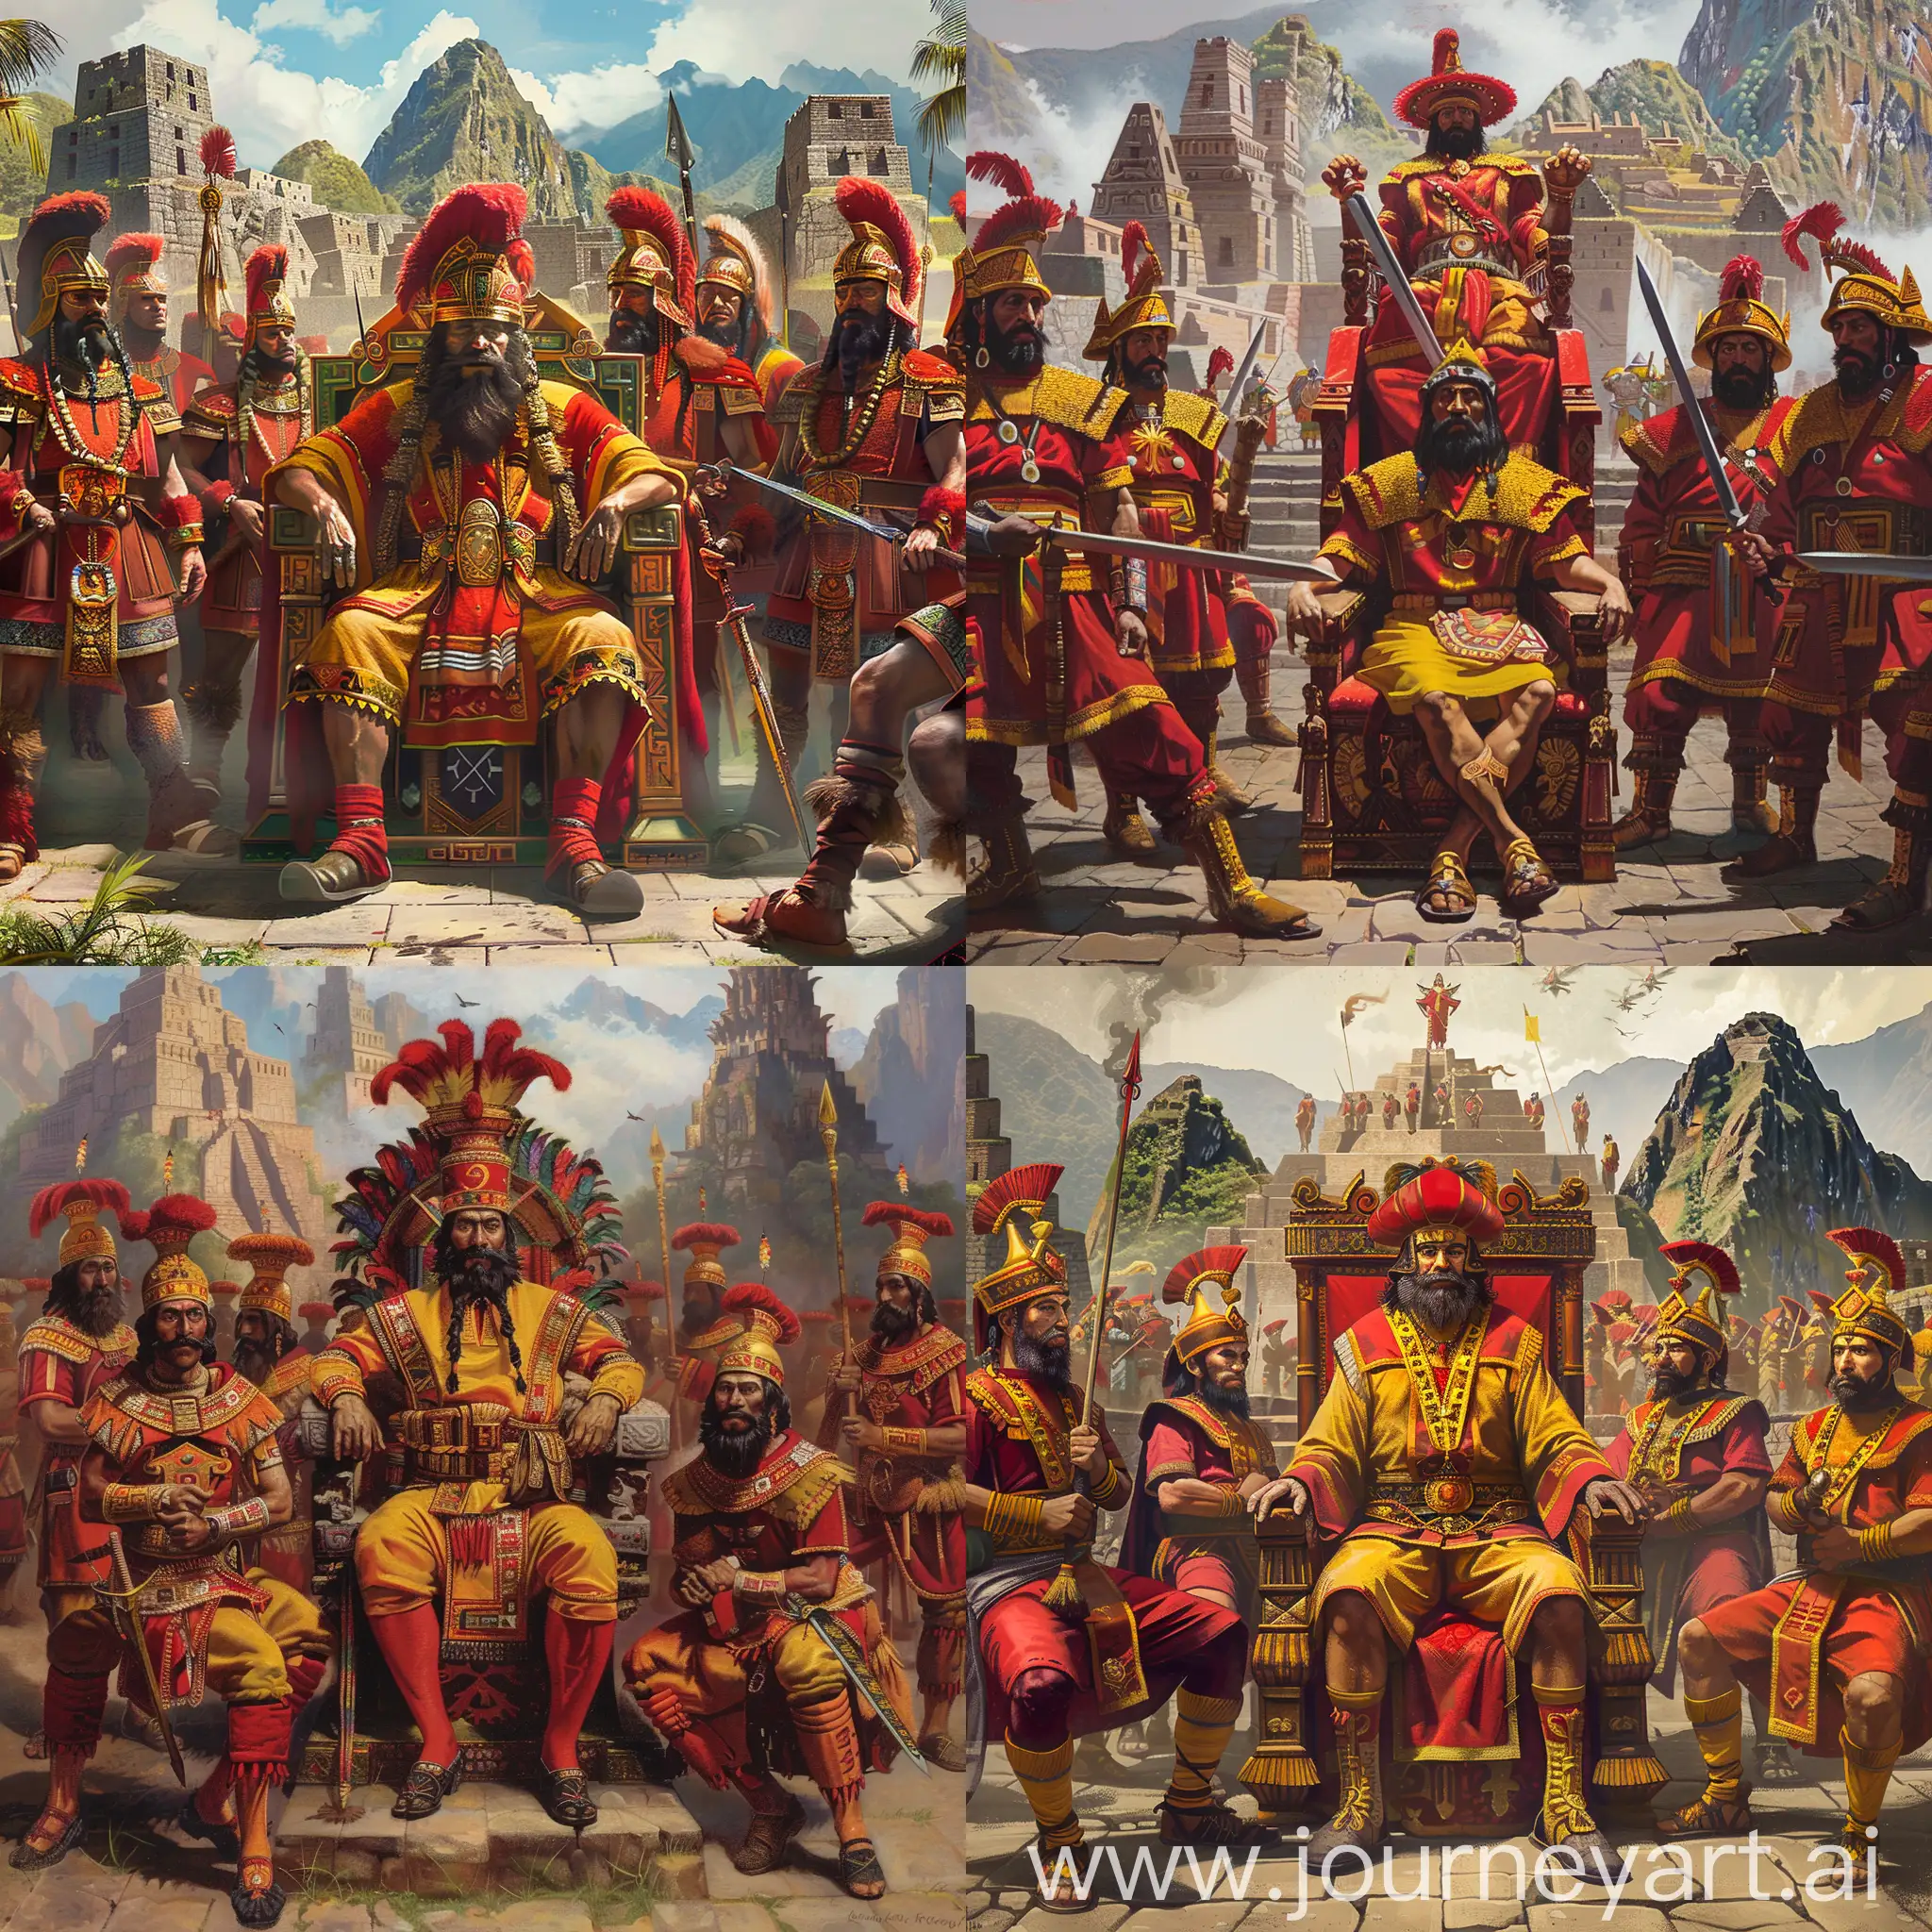 Medieval-Incan-King-Surrounded-by-Warriors-in-Machu-Picchu-Temple